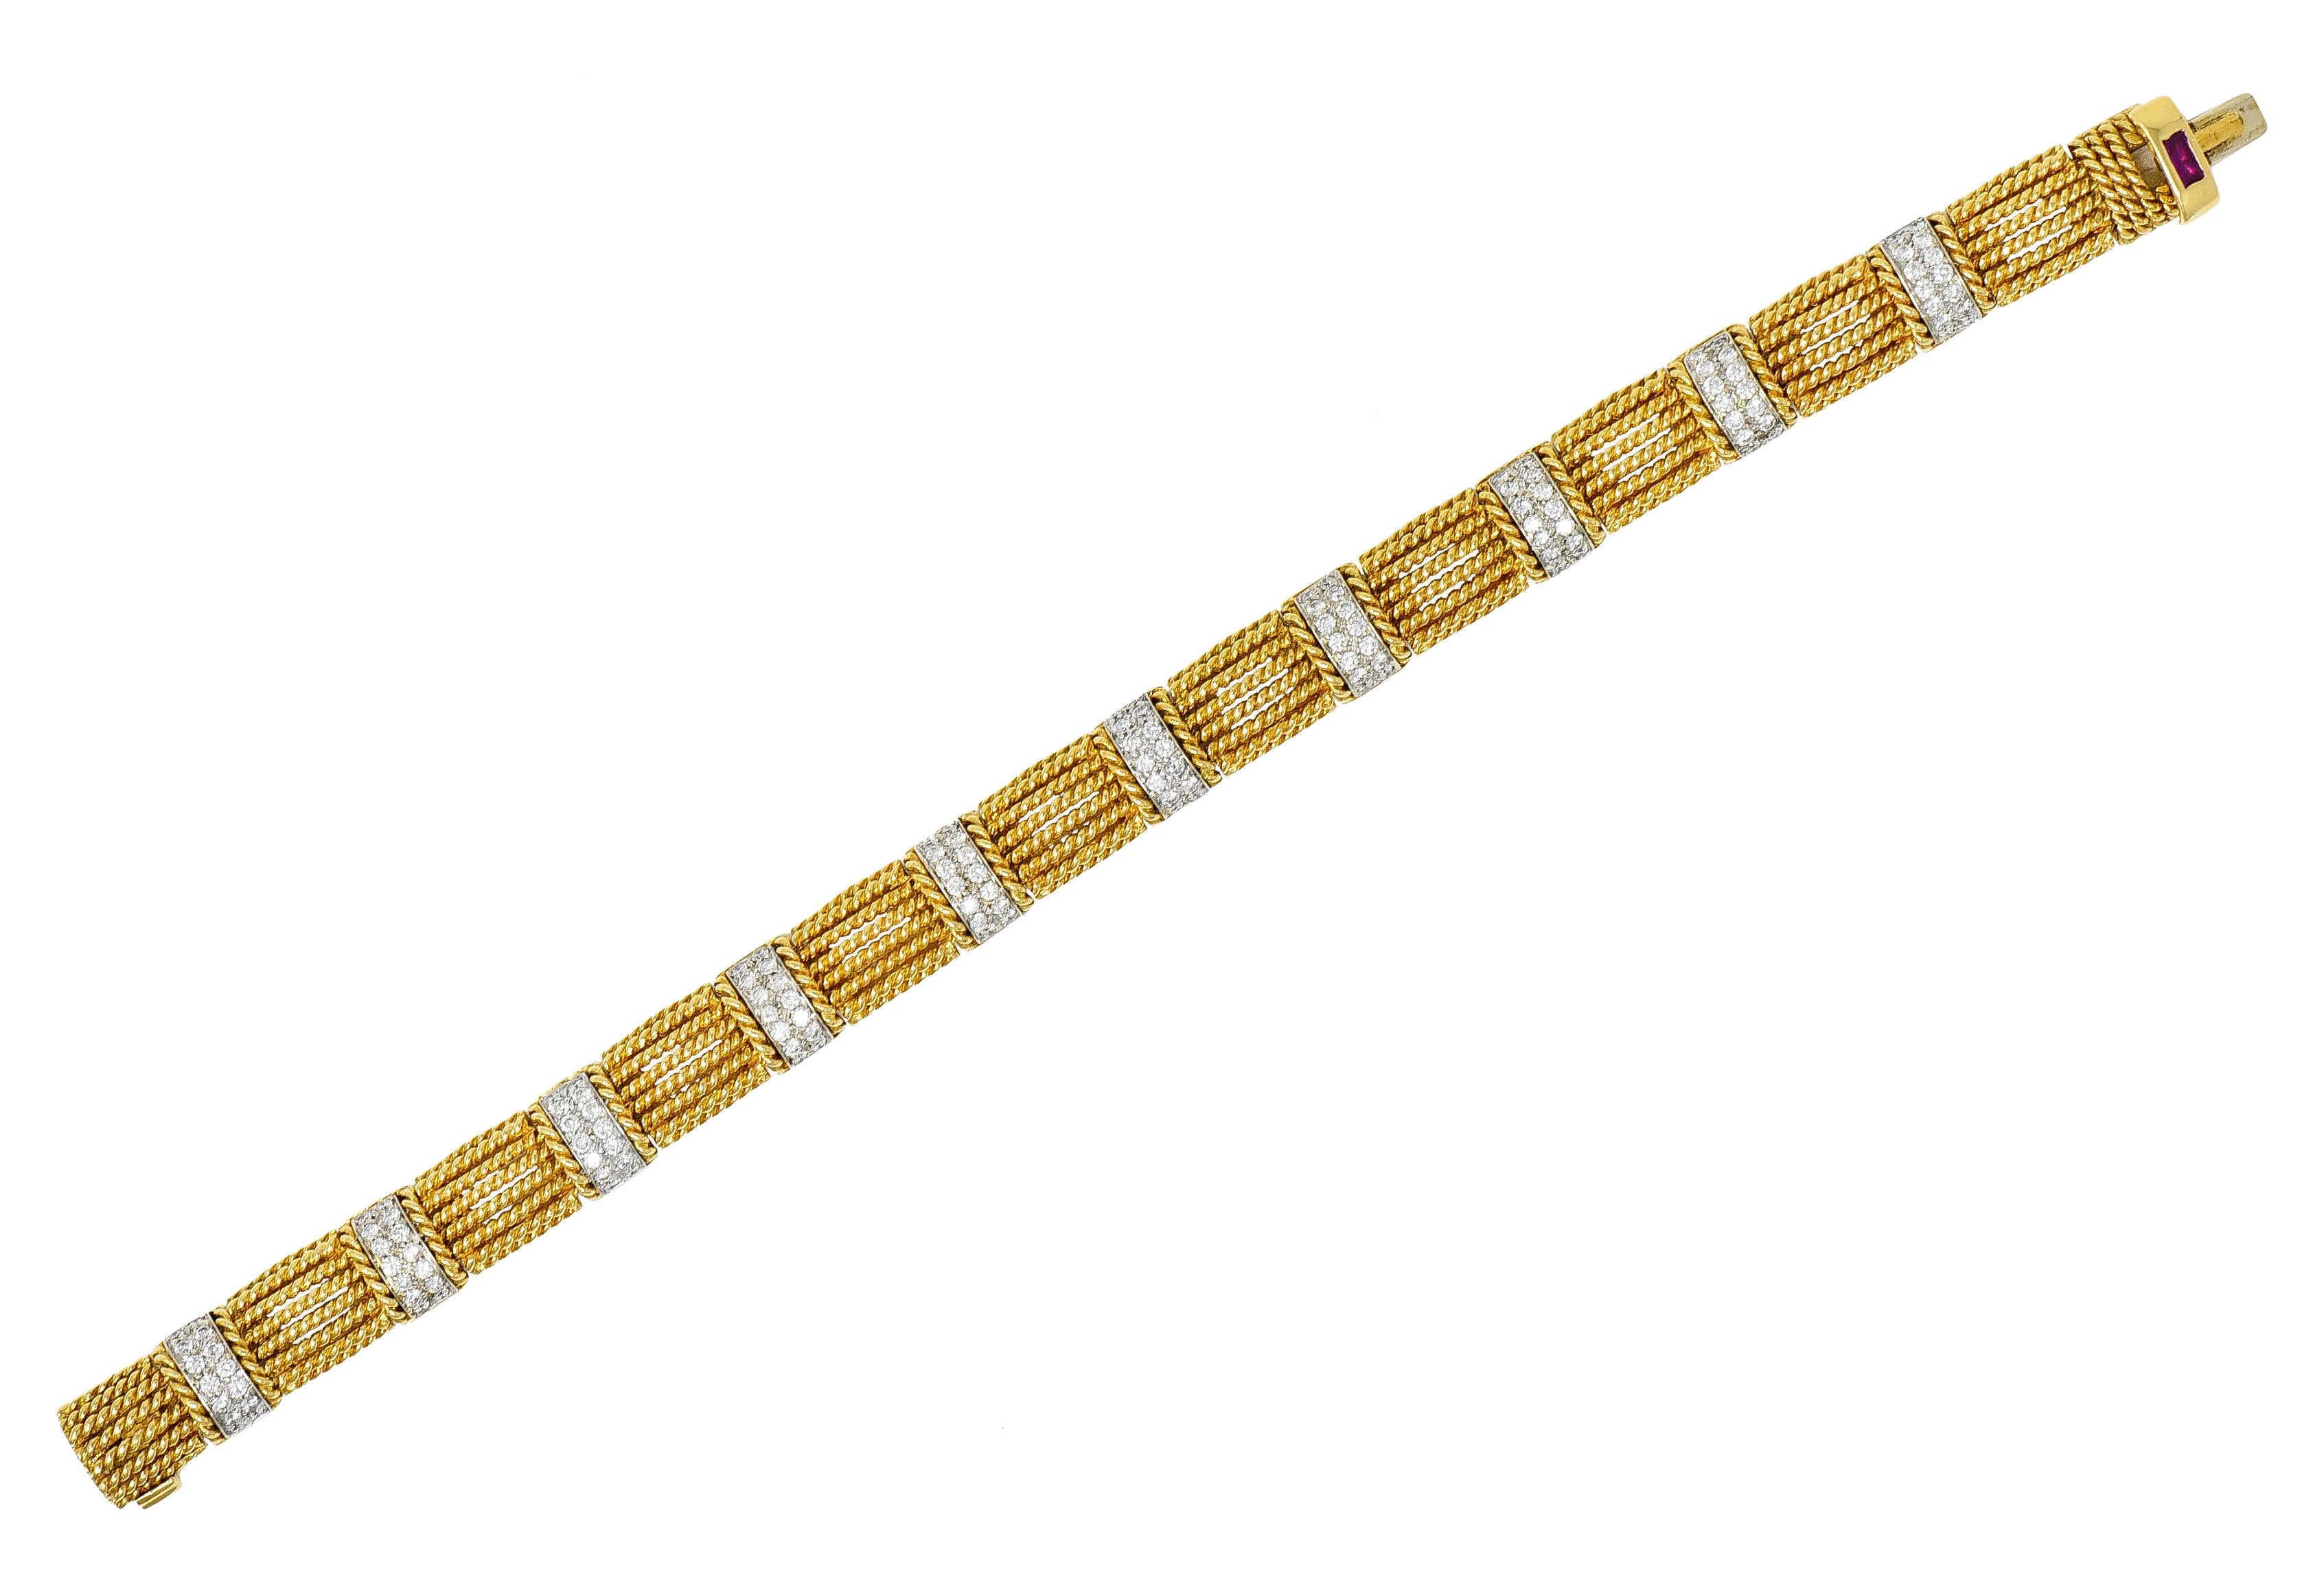 Bracelet is comprised of cushion shaped twisted rope links alternating with pavè diamond bar links

Round brilliant cut diamonds are set in white gold and flanked by additional gold twisted rope

Weighing in total approximately 2.00 carats with G/H